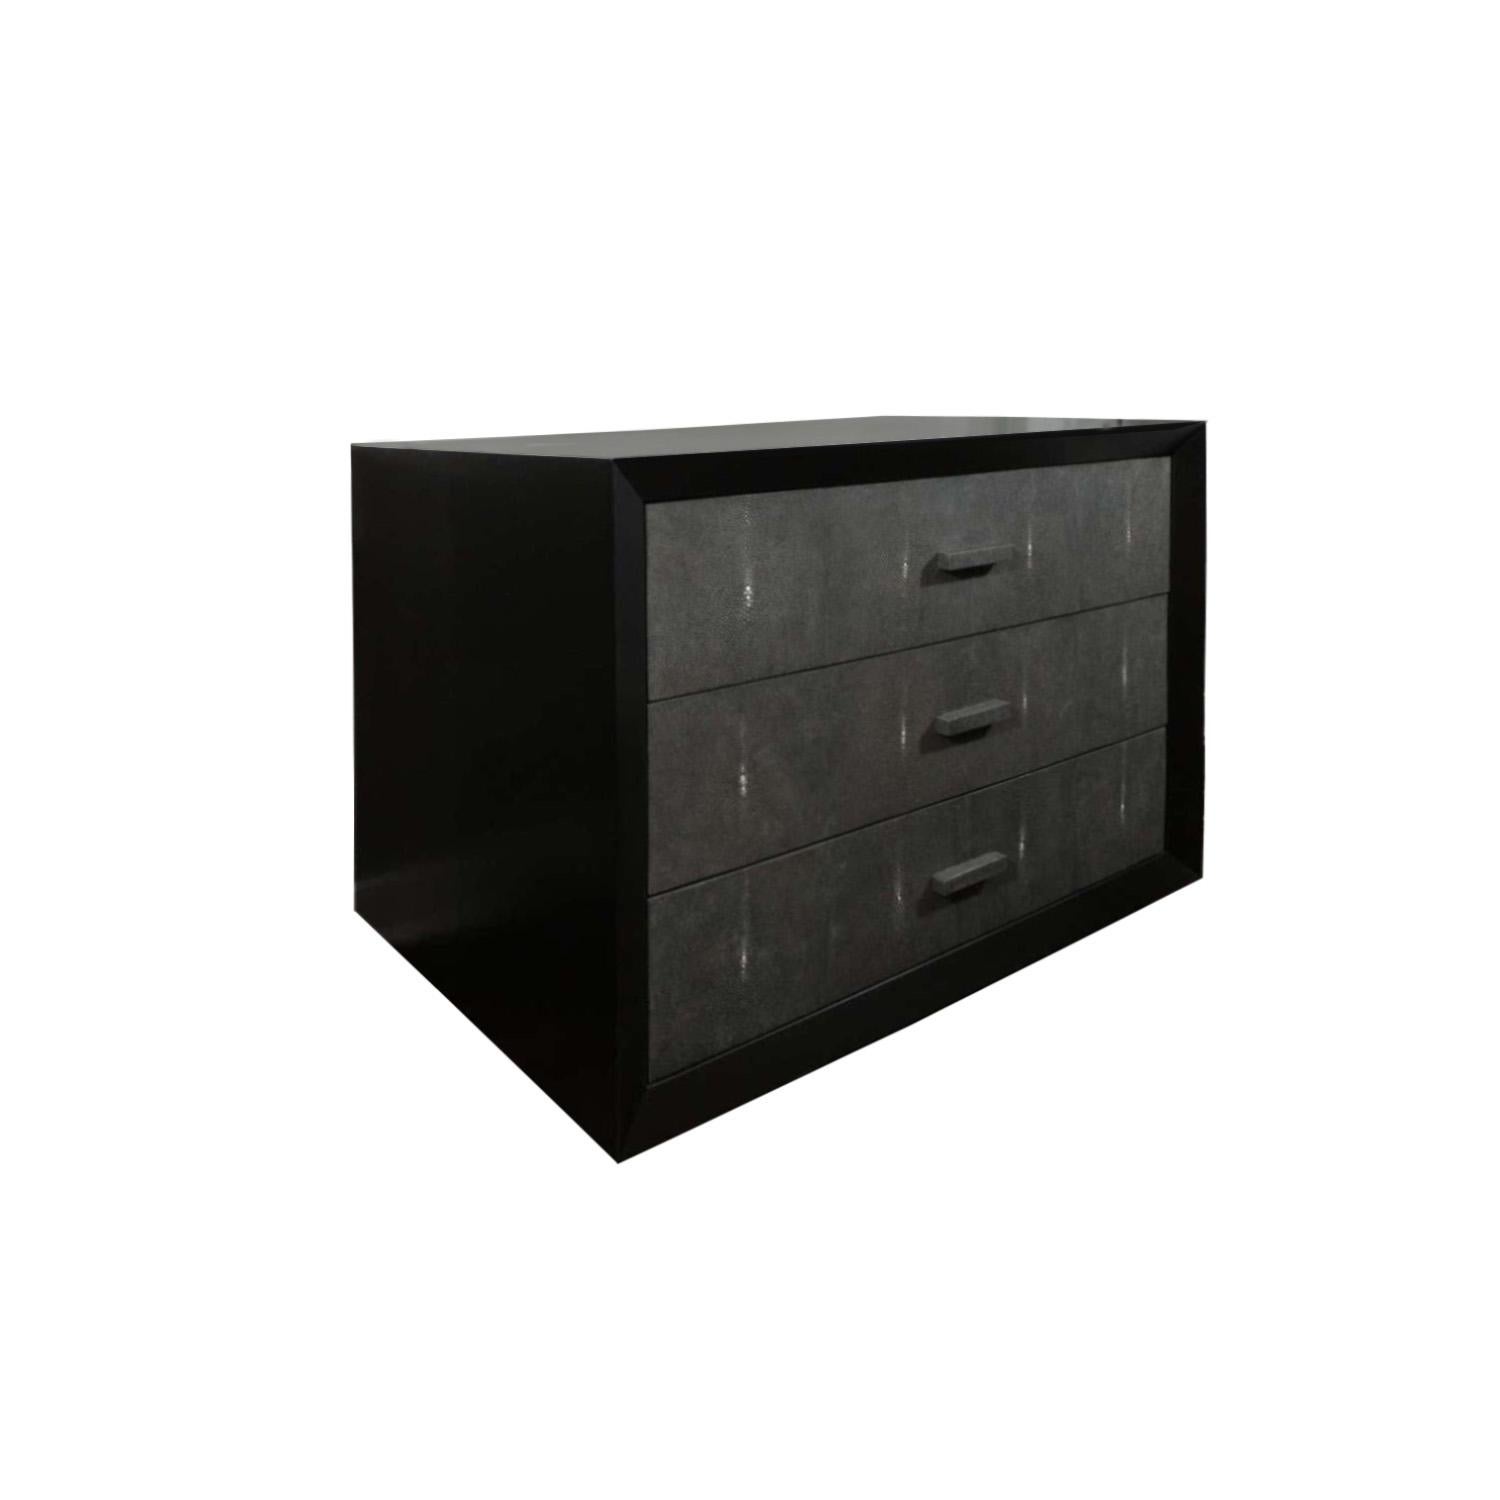 Made to order, custom lacquer and shagreen 3- drawer dresser. Elegant black lacquered three drawer dresser with genuine gray shagreen drawer fronts.

The floor model for this piece is available for sale. 